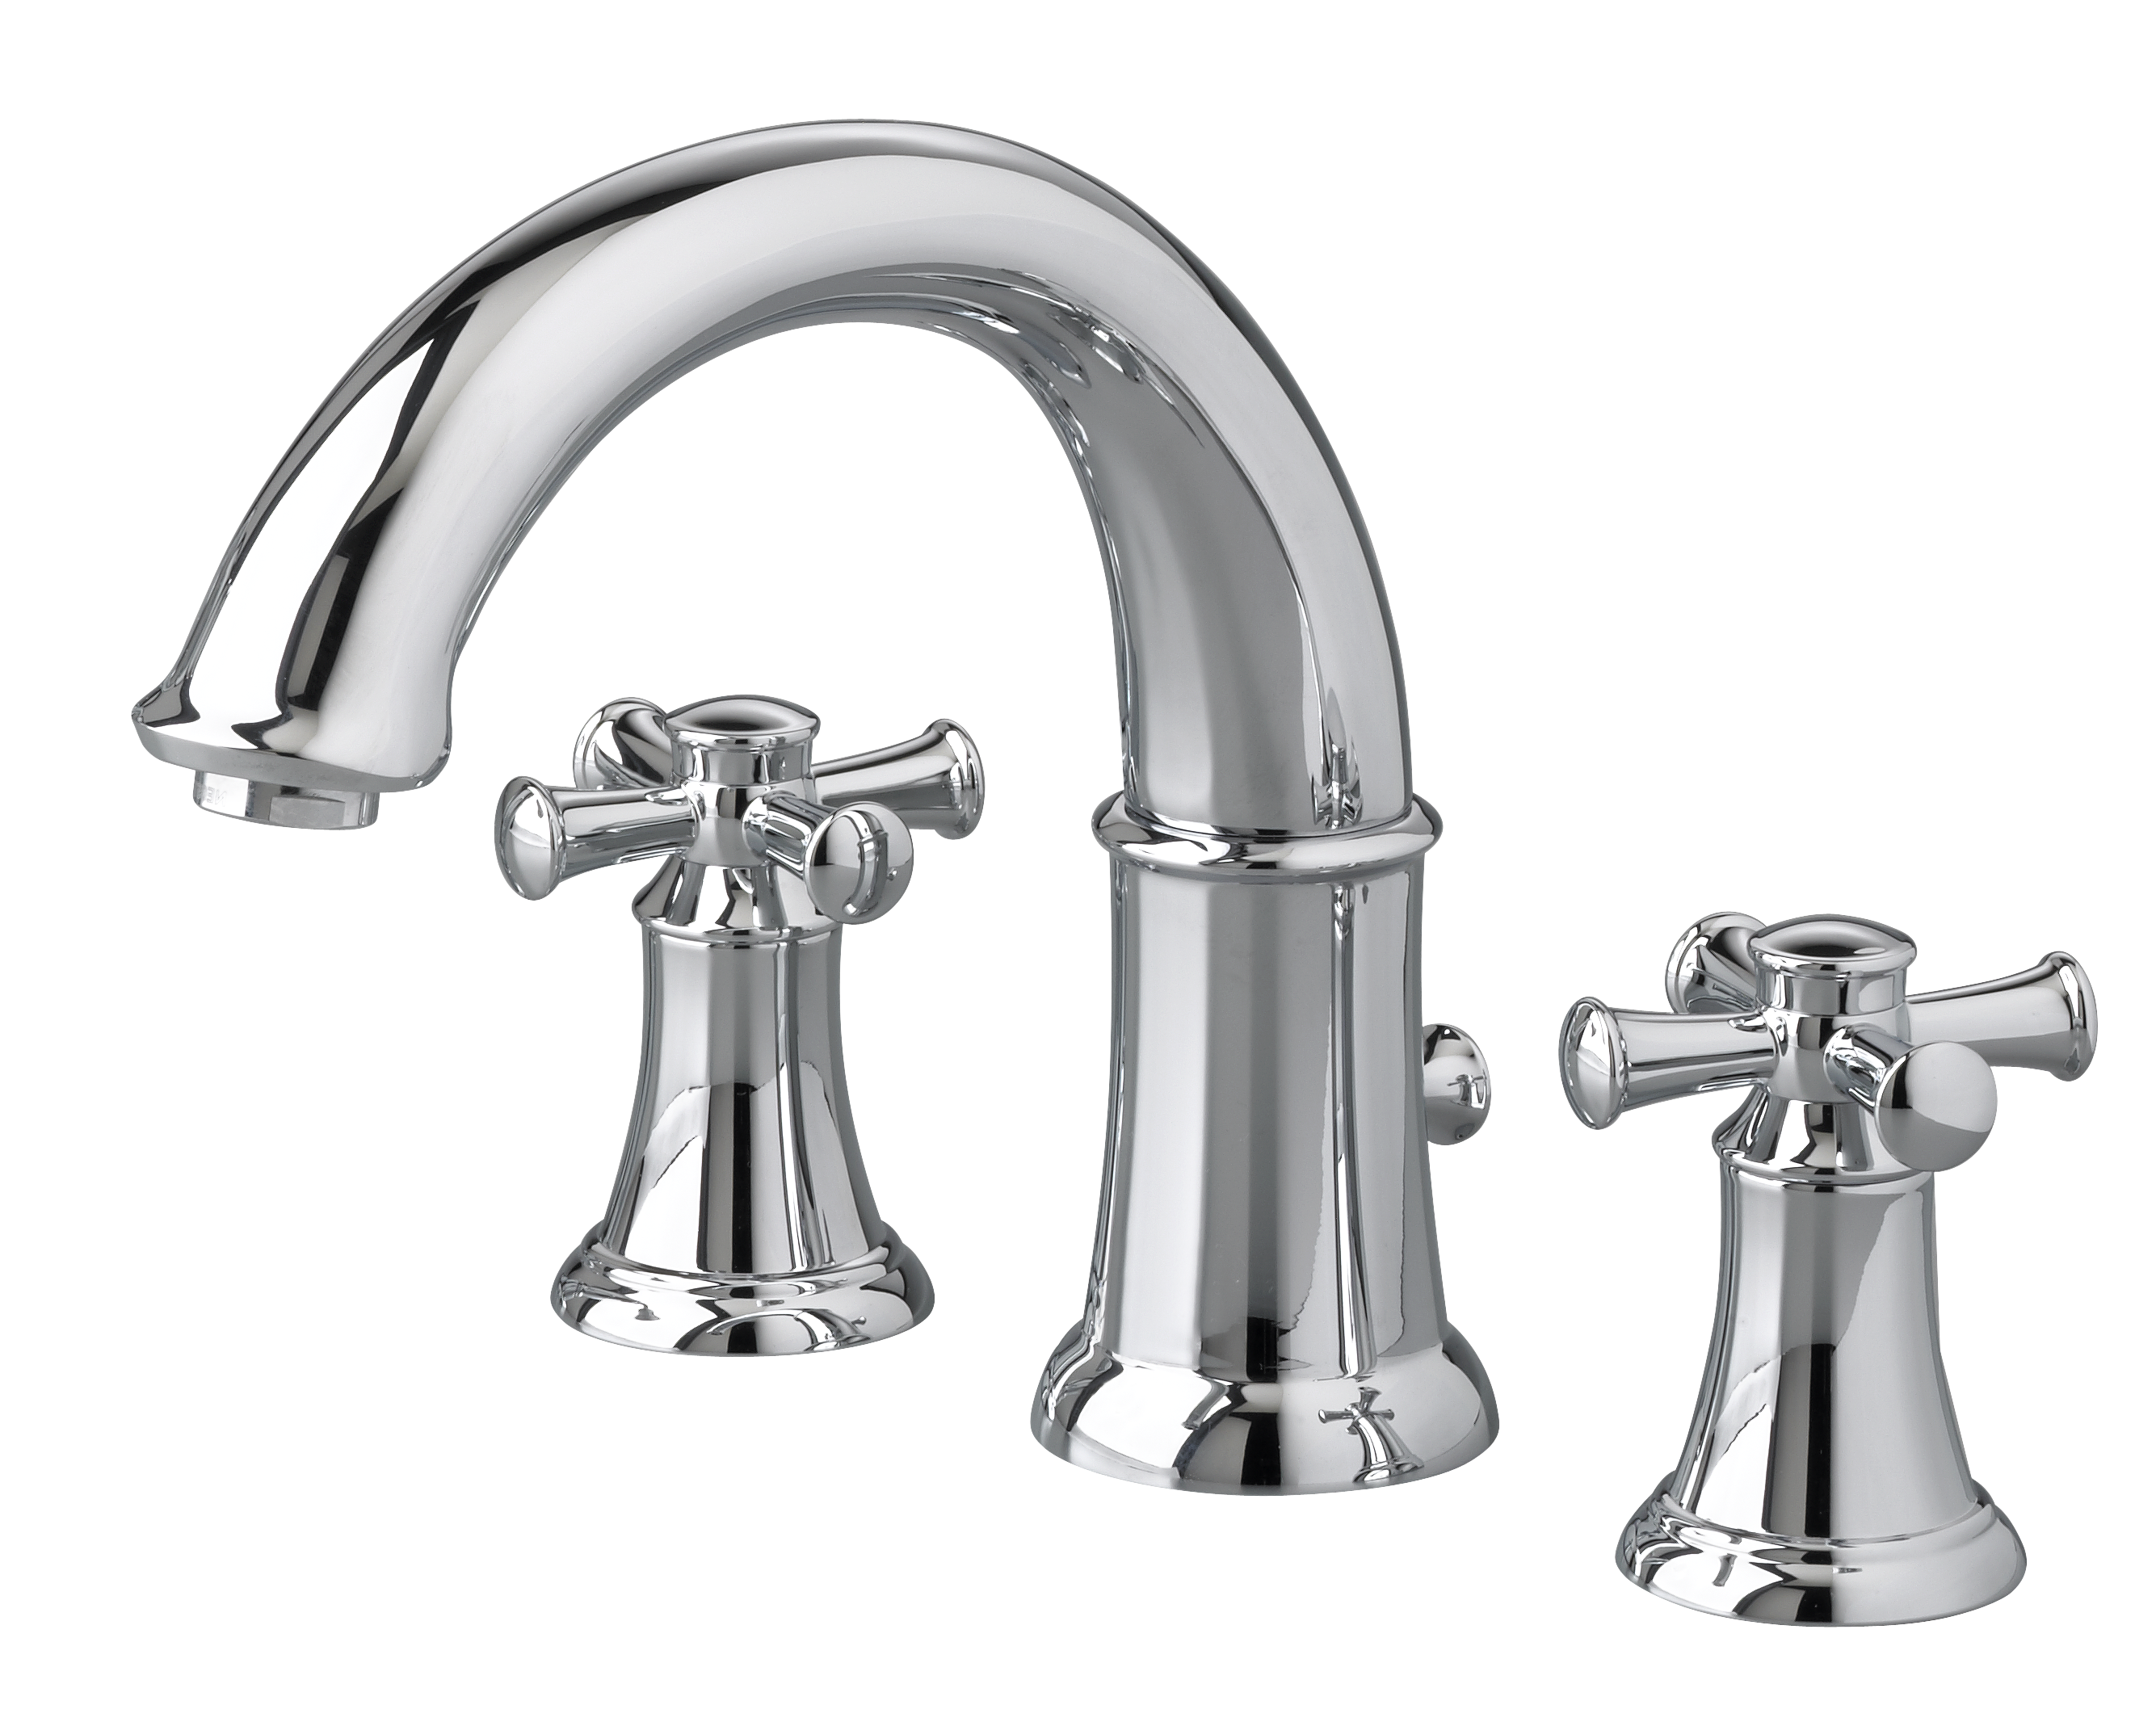 Portsmouth Bathtub Faucet for Flash Rough in Valve with Cross Handles CHROME